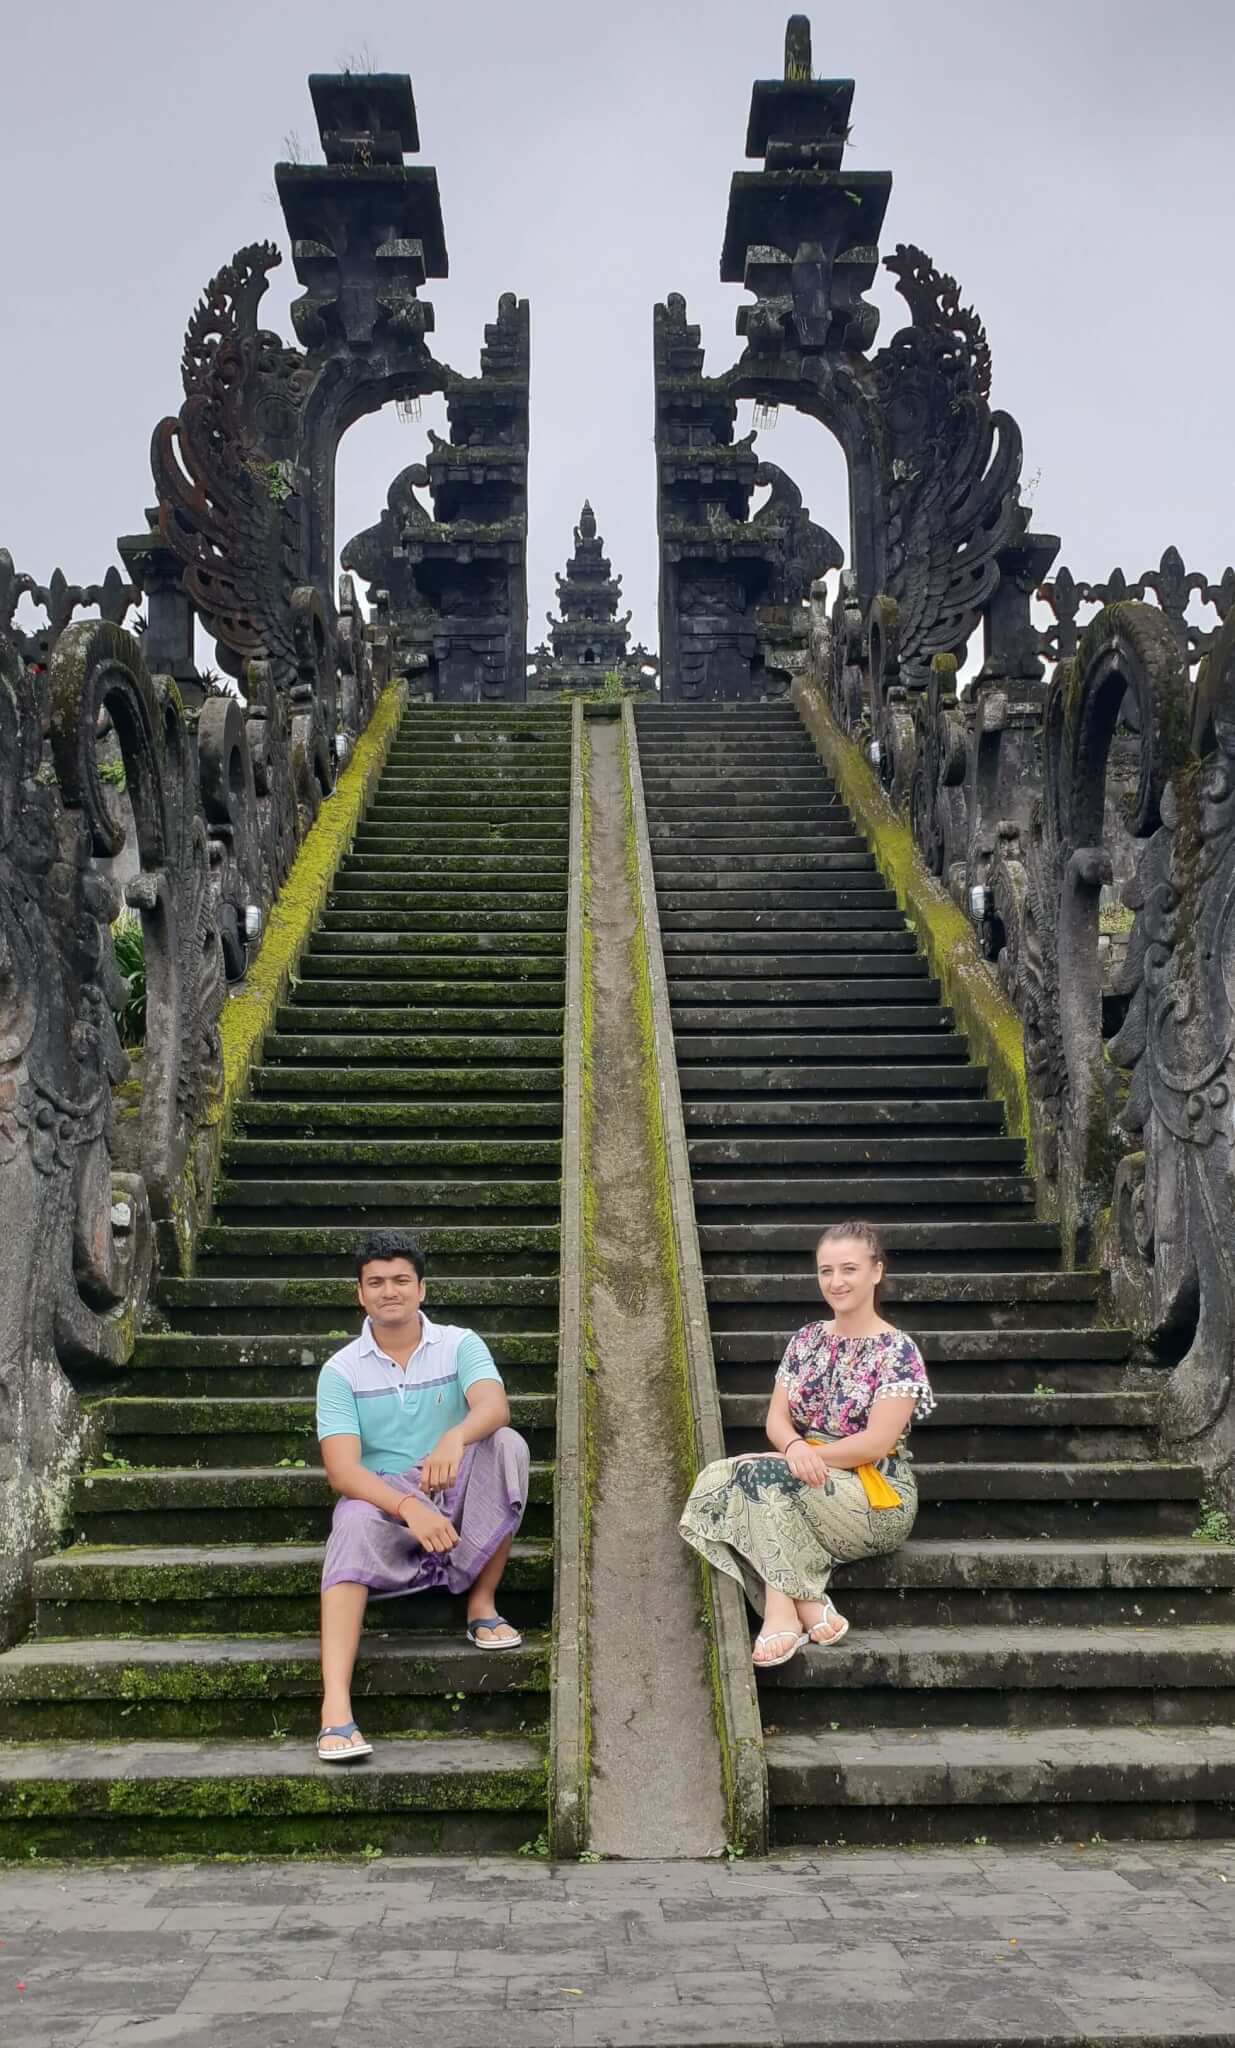 The temple has flights of stairs leading to brick gateways that in turn lead to the main spire structure, also called the Pura Penataran Agung